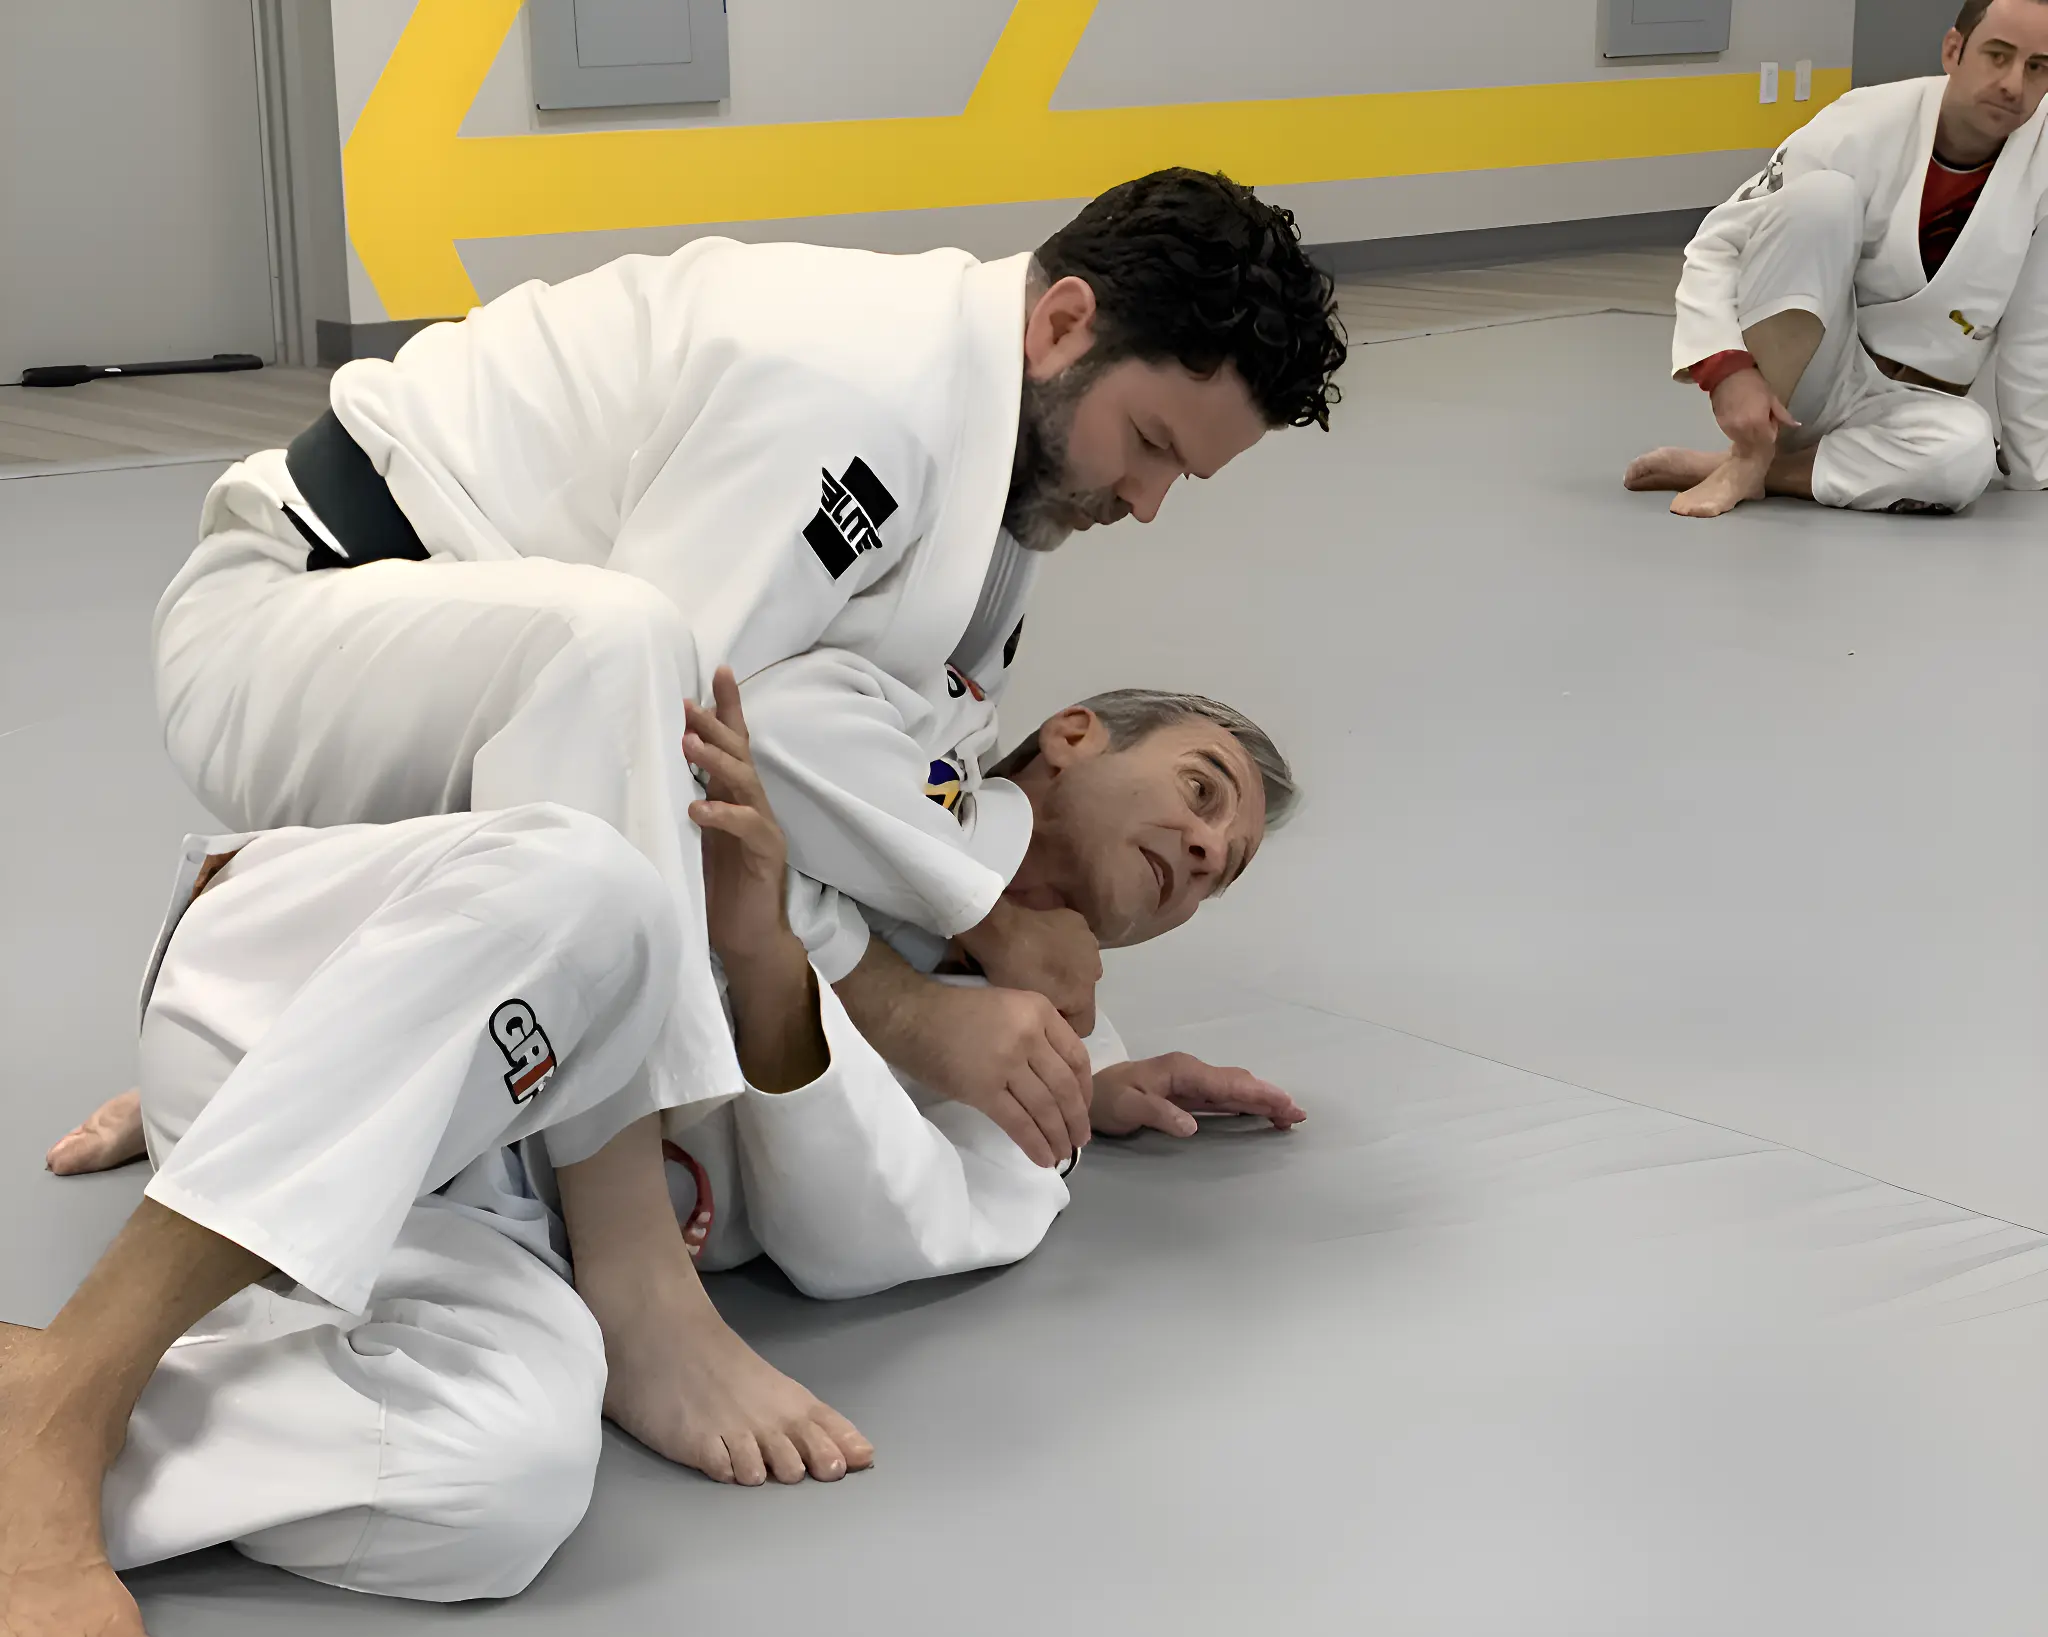 Joe Heller of River City Warriors participates in a BJJ demo with Pedro Sauer